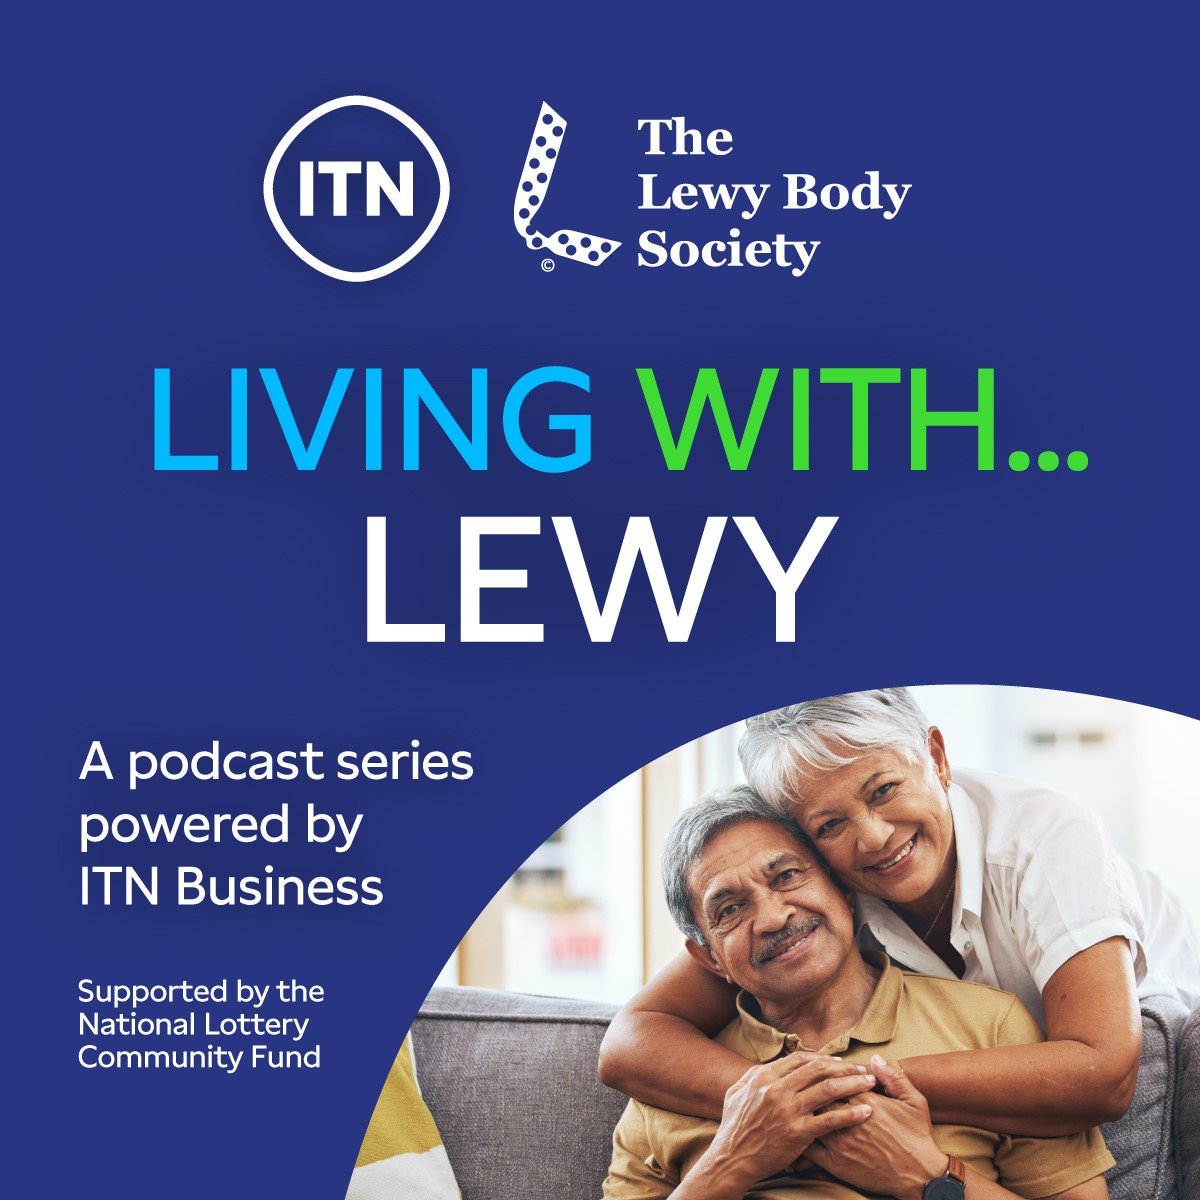 Looking for a new podcast to add to your playlist? Give our 'Living with Lewy' series a try. We touch upon everything from personal journeys to expert advice on managing Lewy body dementia. lewybody.org/information-an…